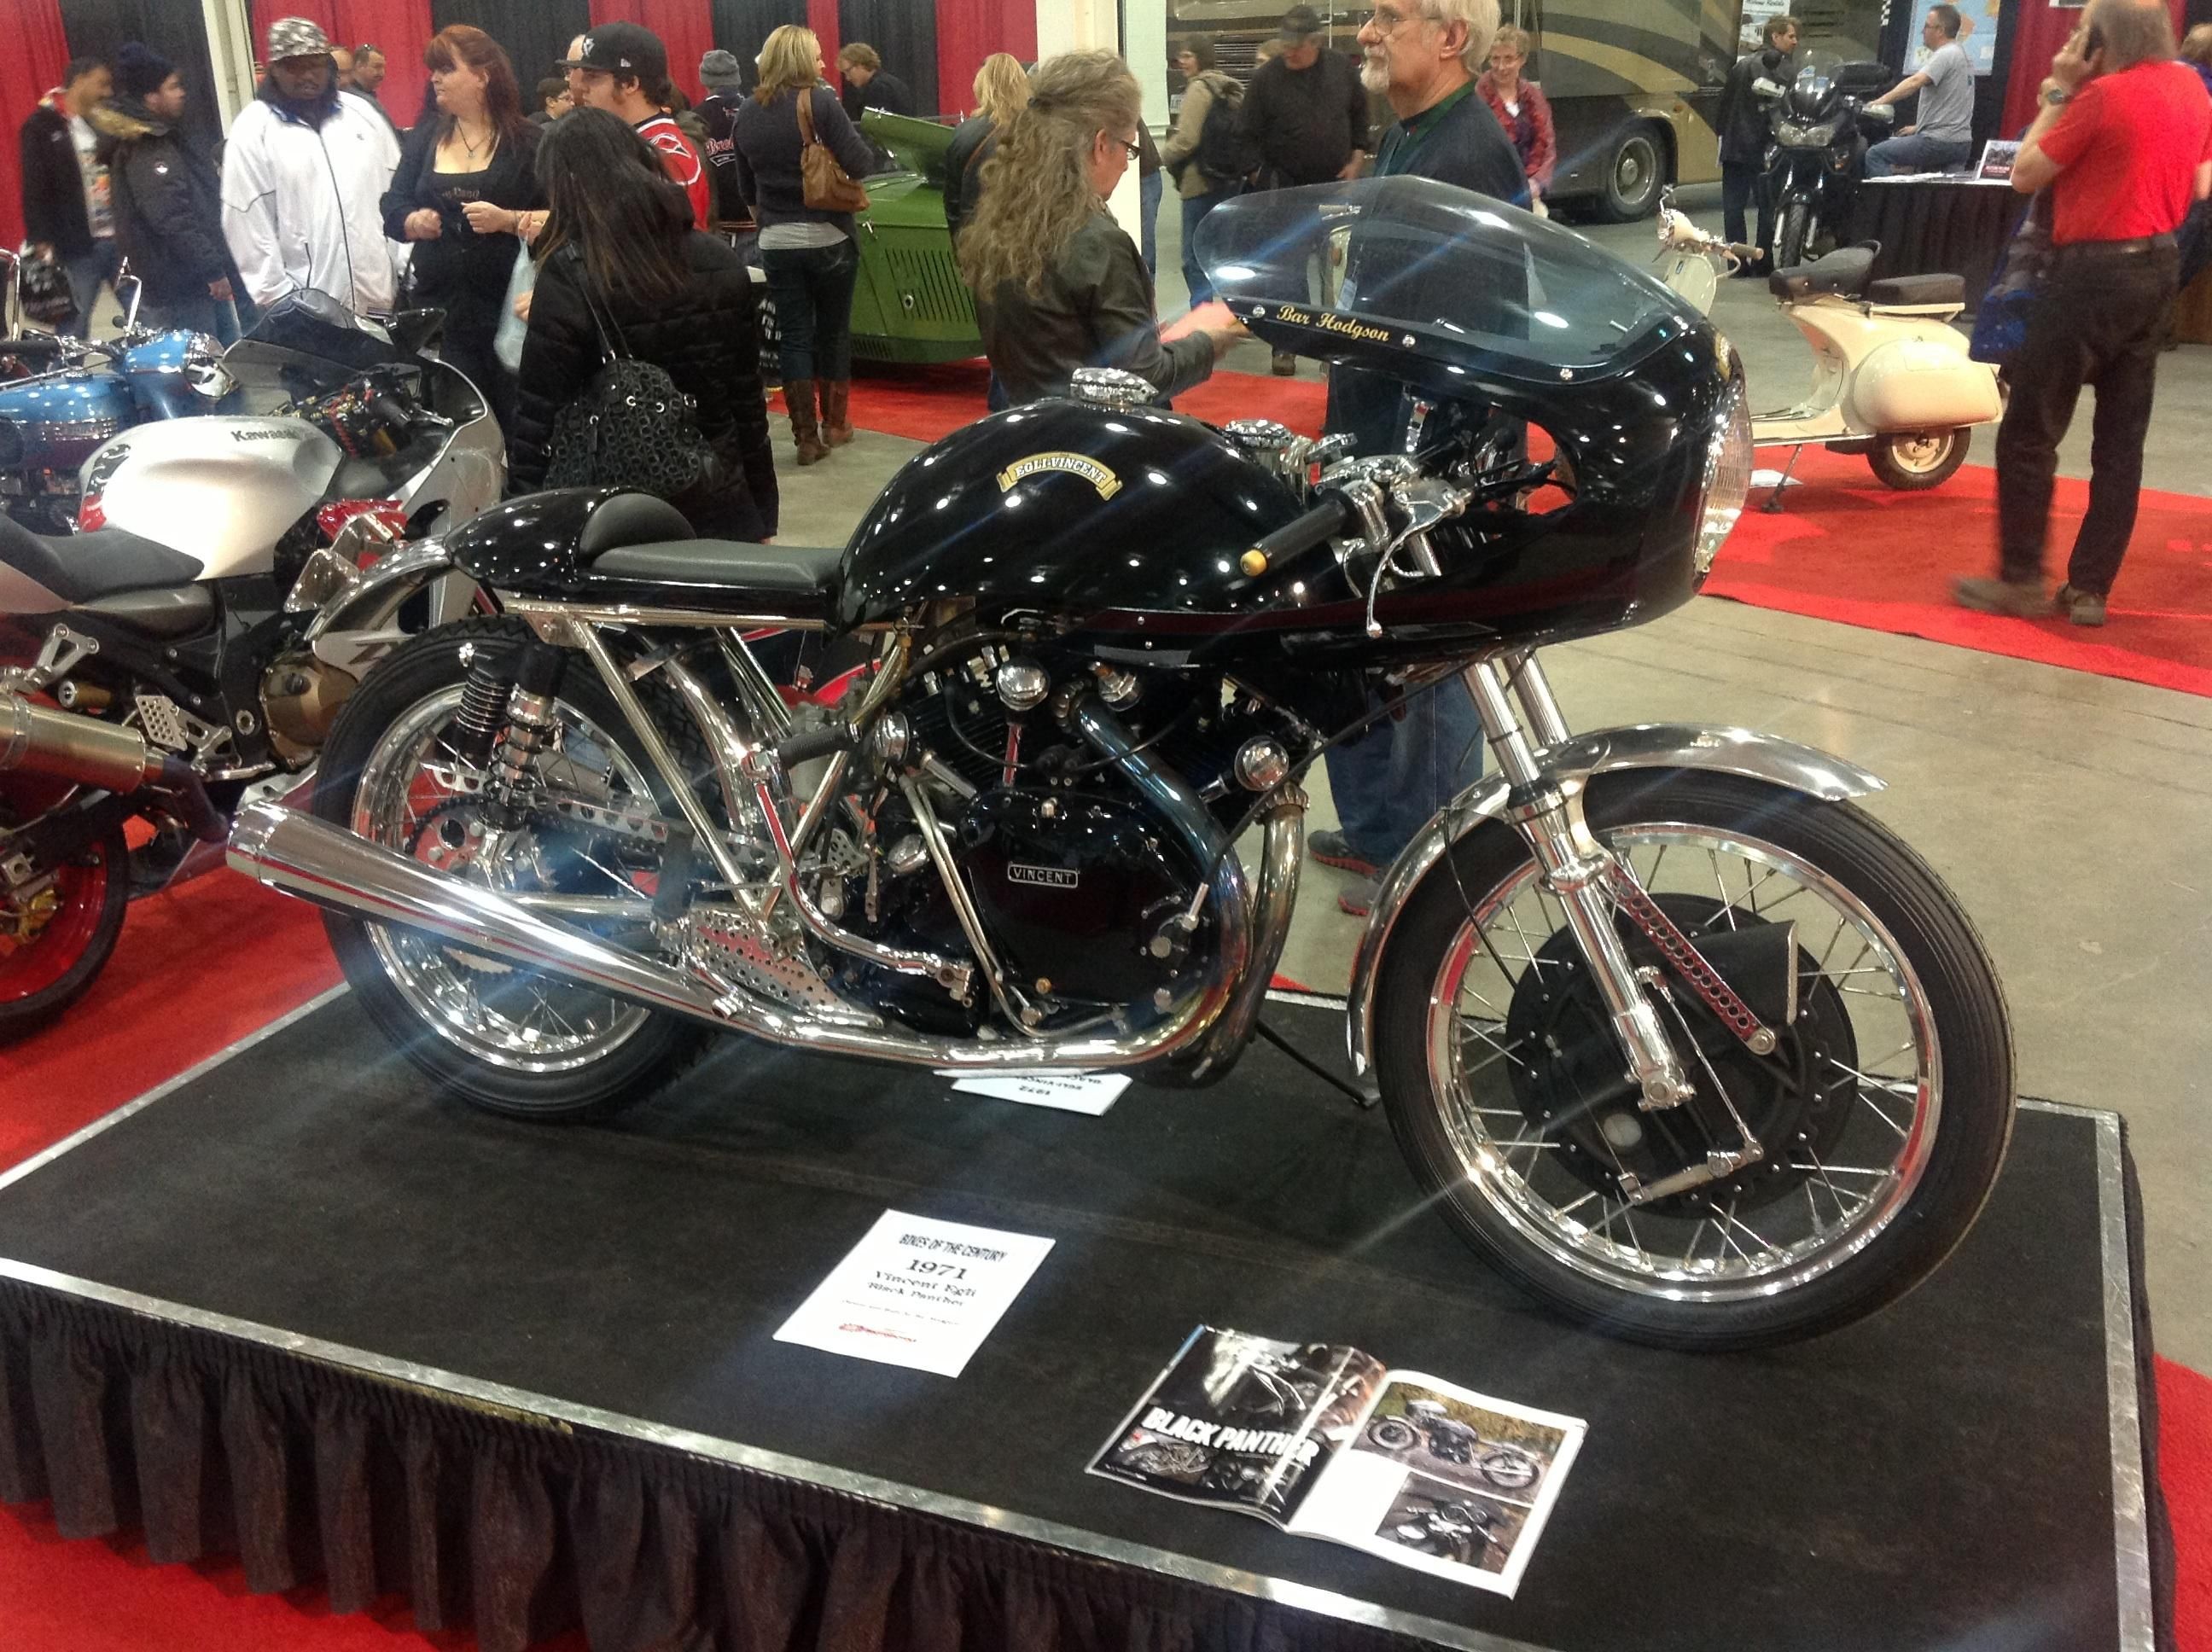 Egli-Vincent at the Spring Motorcycle Show